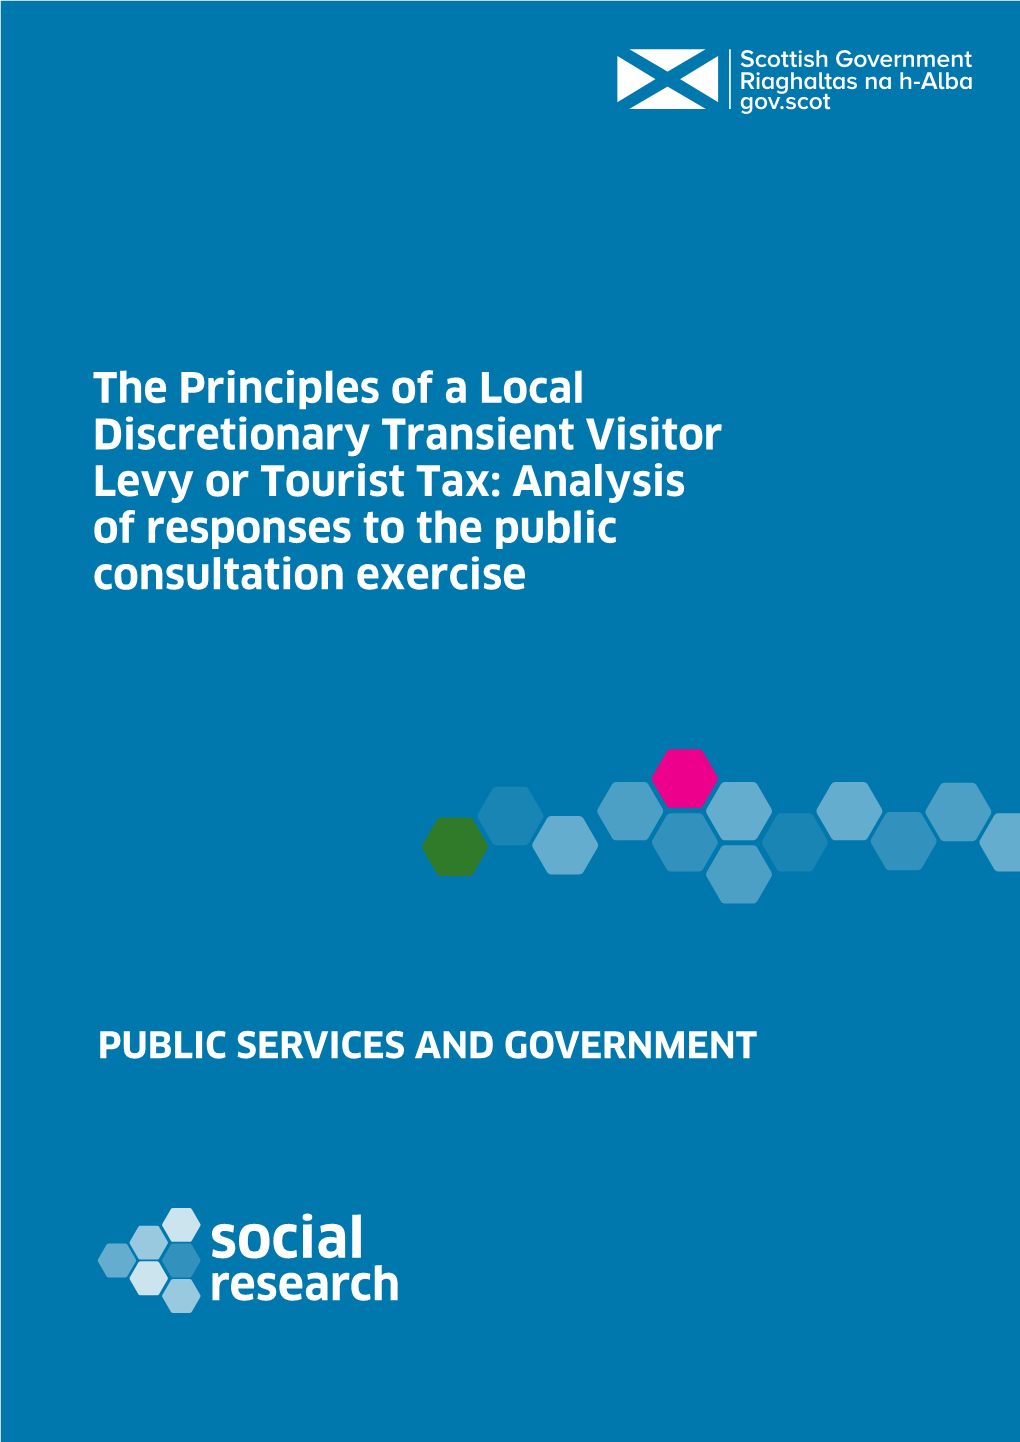 The Principles of a Local Discretionary Transient Visitor Levy Or Tourist Tax: Analysis of Responses to the Public Consultation Exercise